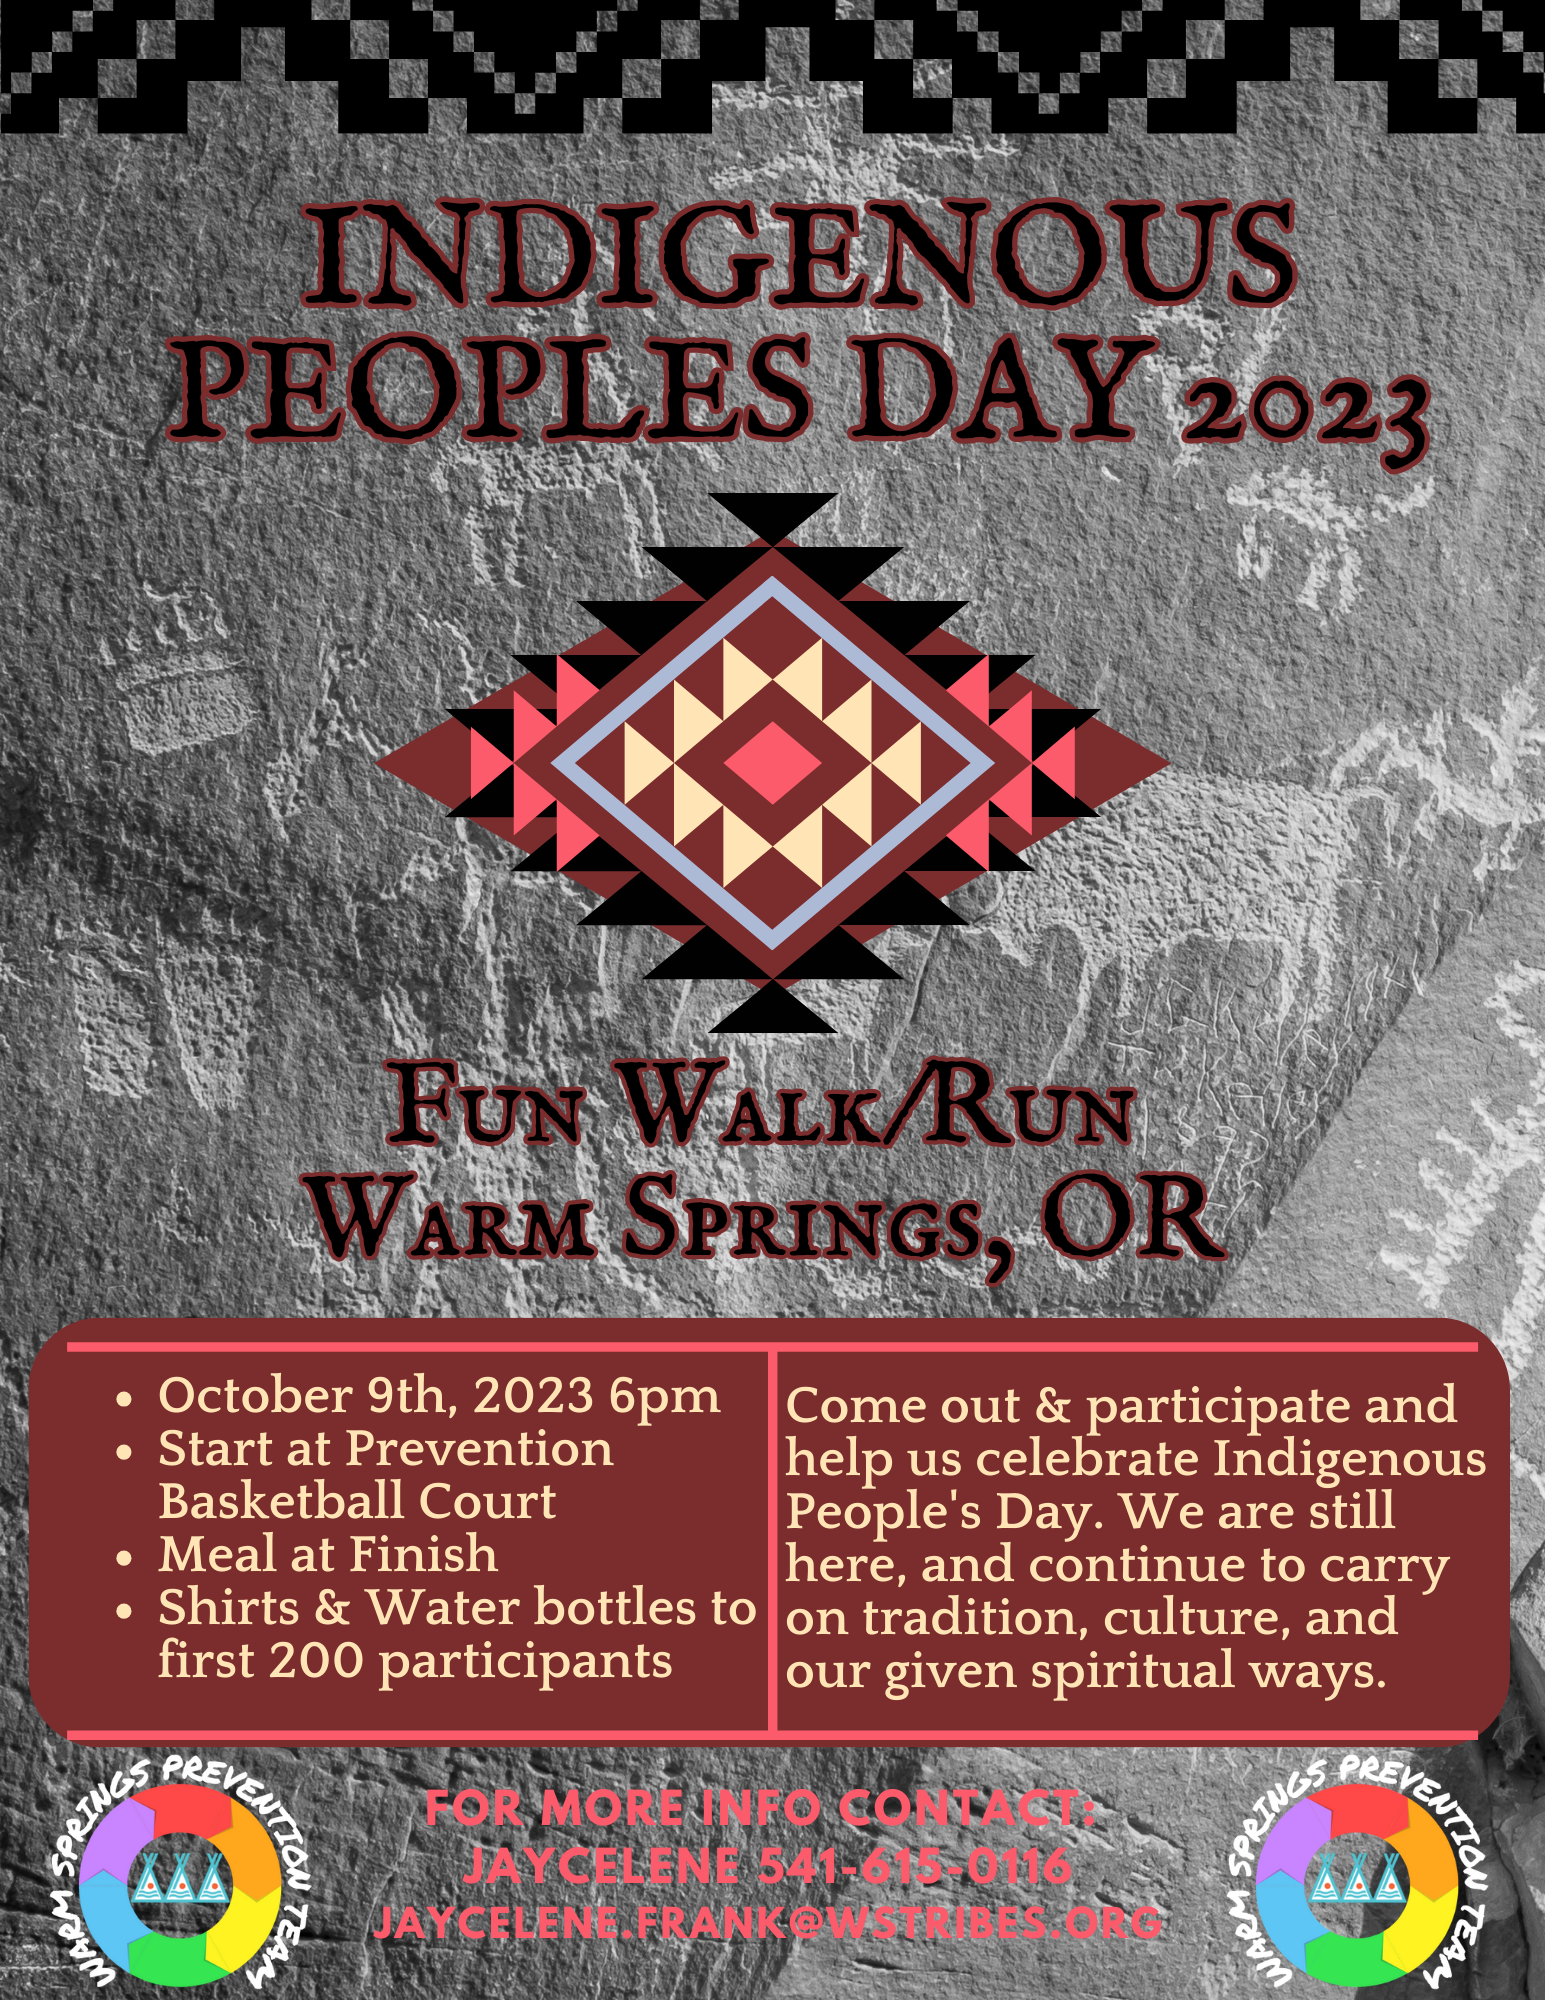 Celebrate Indigenous Peoples Day